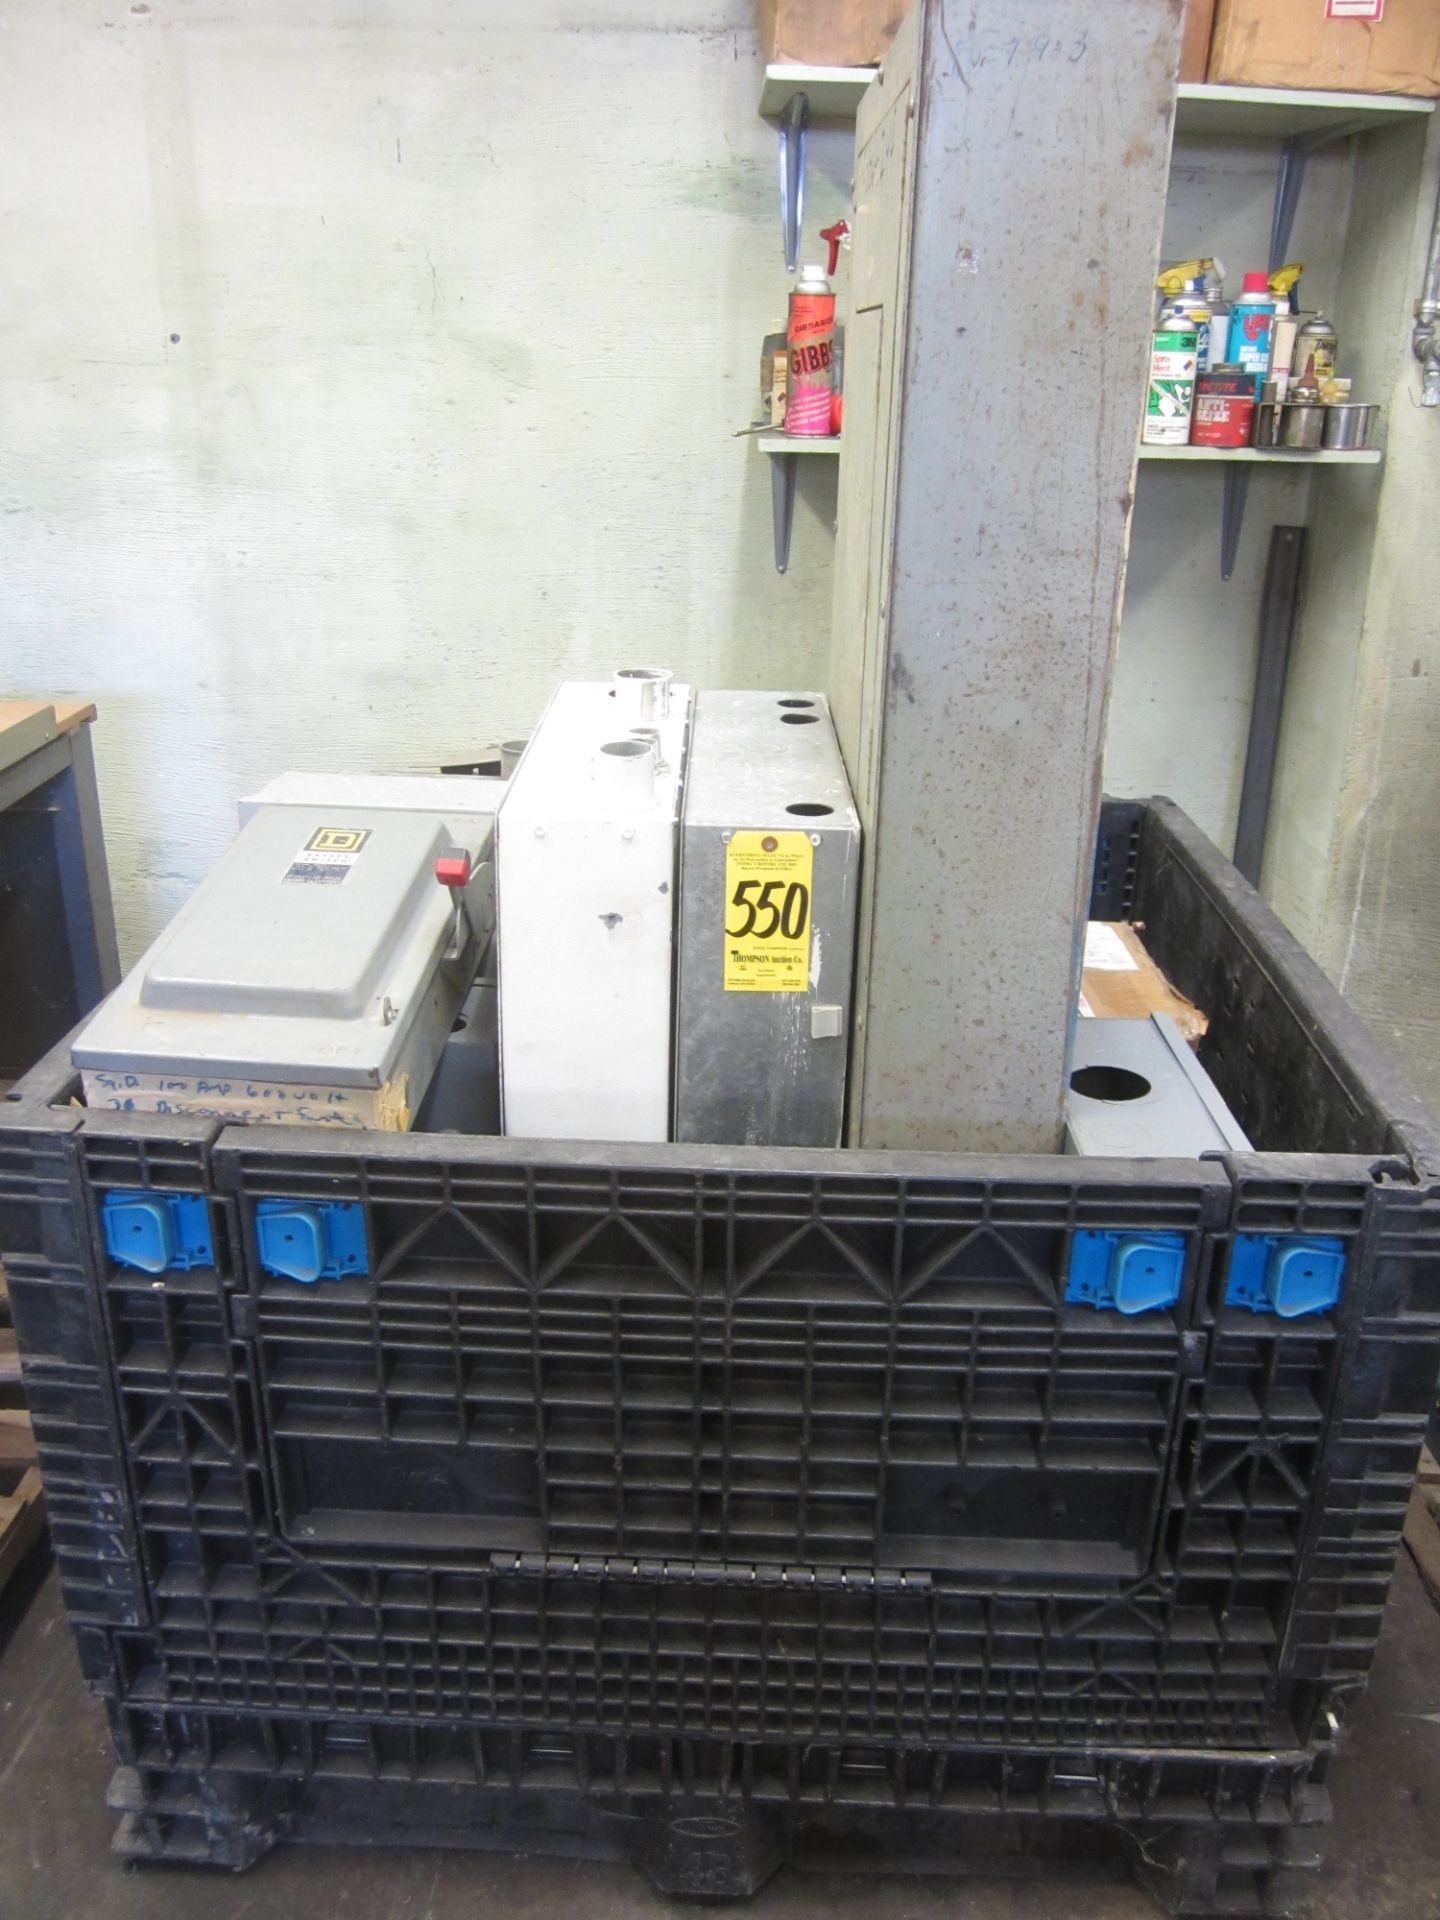 Plastic Basket with Disconnect Boxes and Miscellaneous, Electrical Enclosures